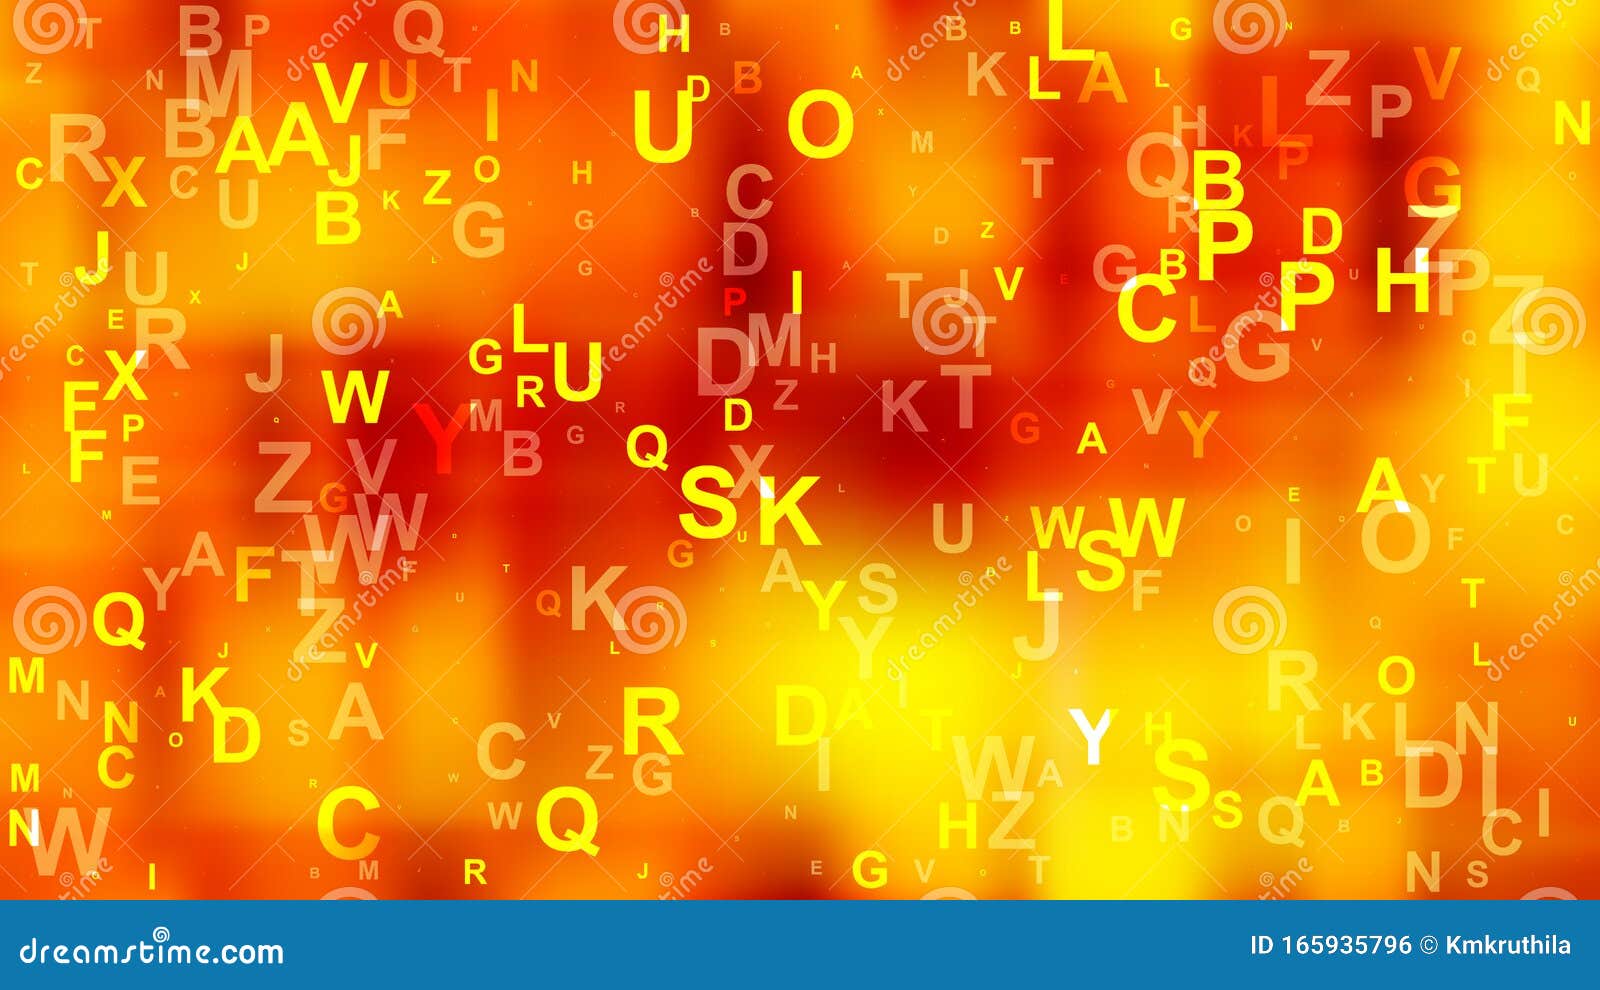 Abstract Red And Yellow Scattered Alphabet Letters Background Image